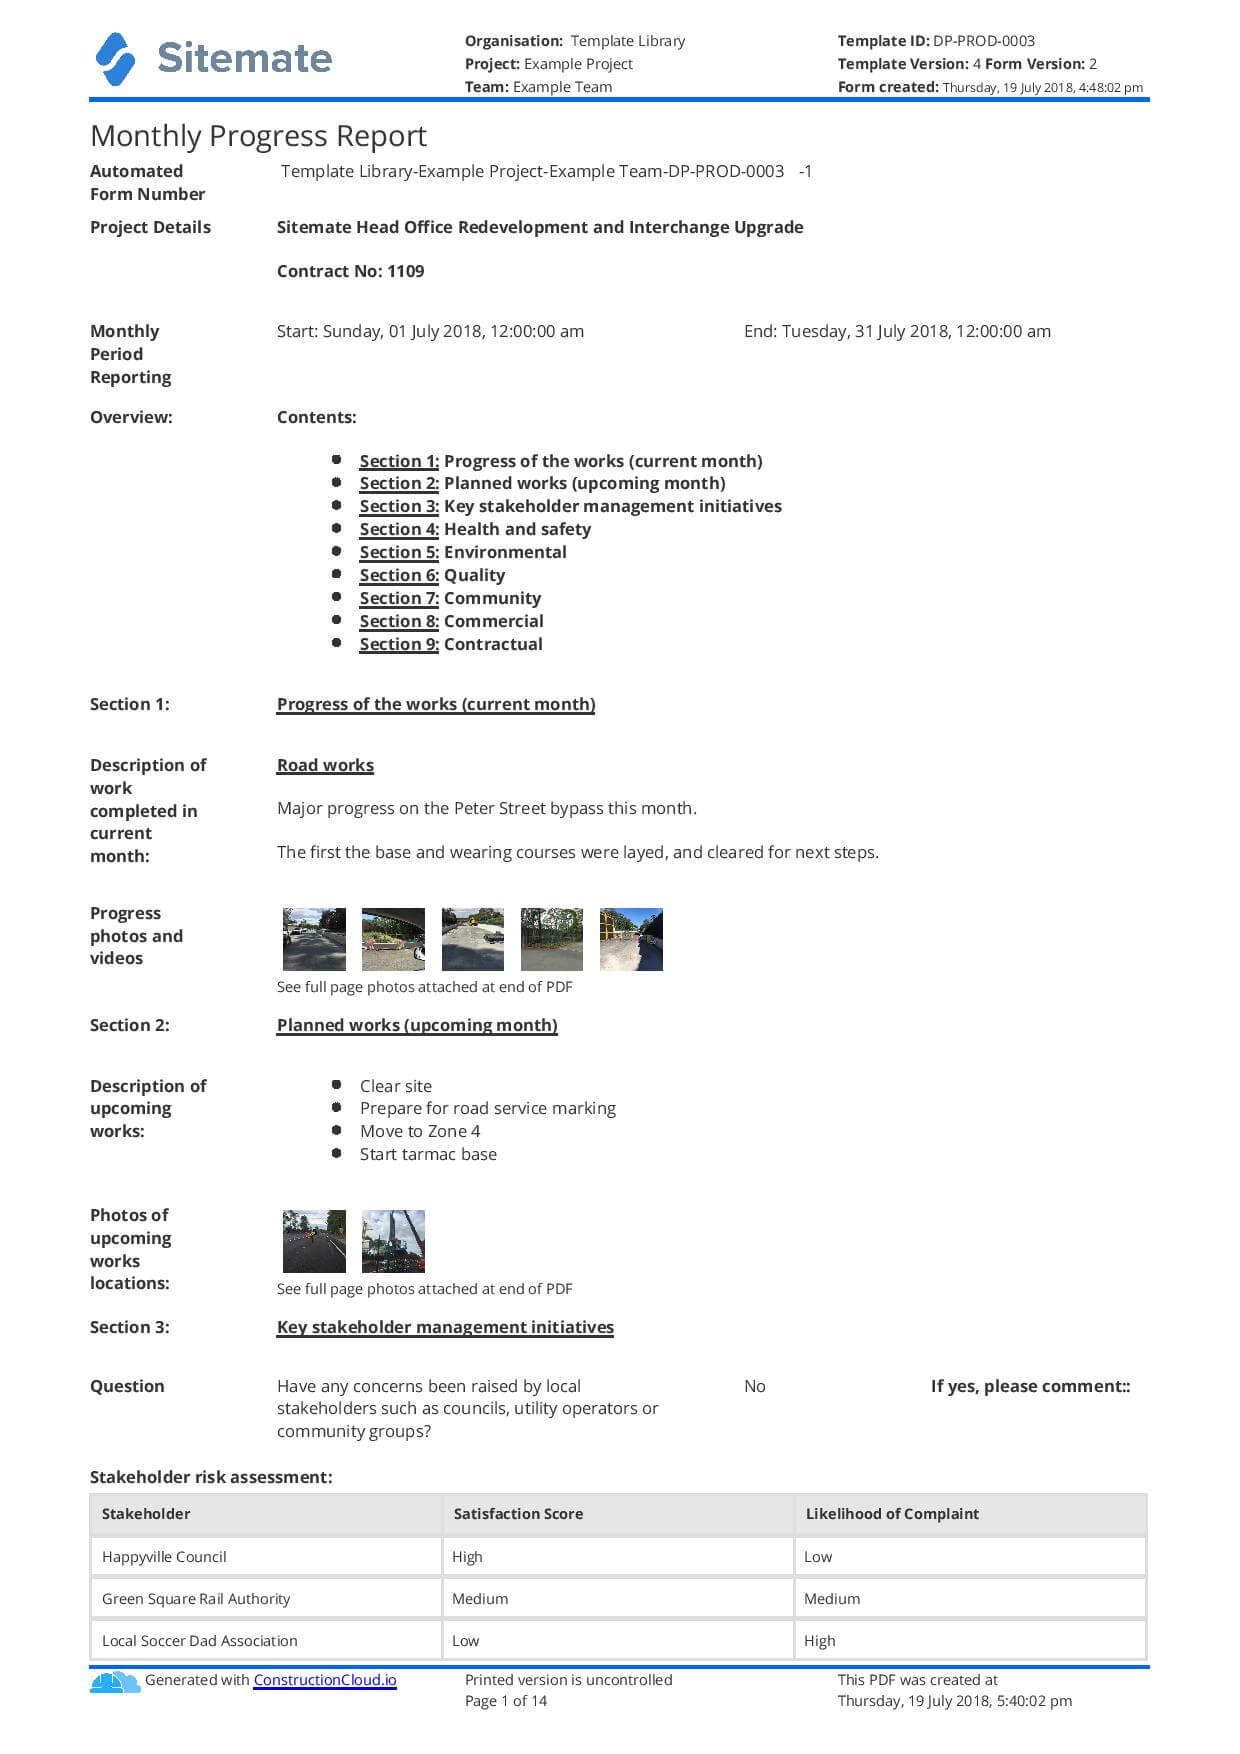 Monthly Construction Progress Report Template: Use This Pertaining To Progress Report Template For Construction Project